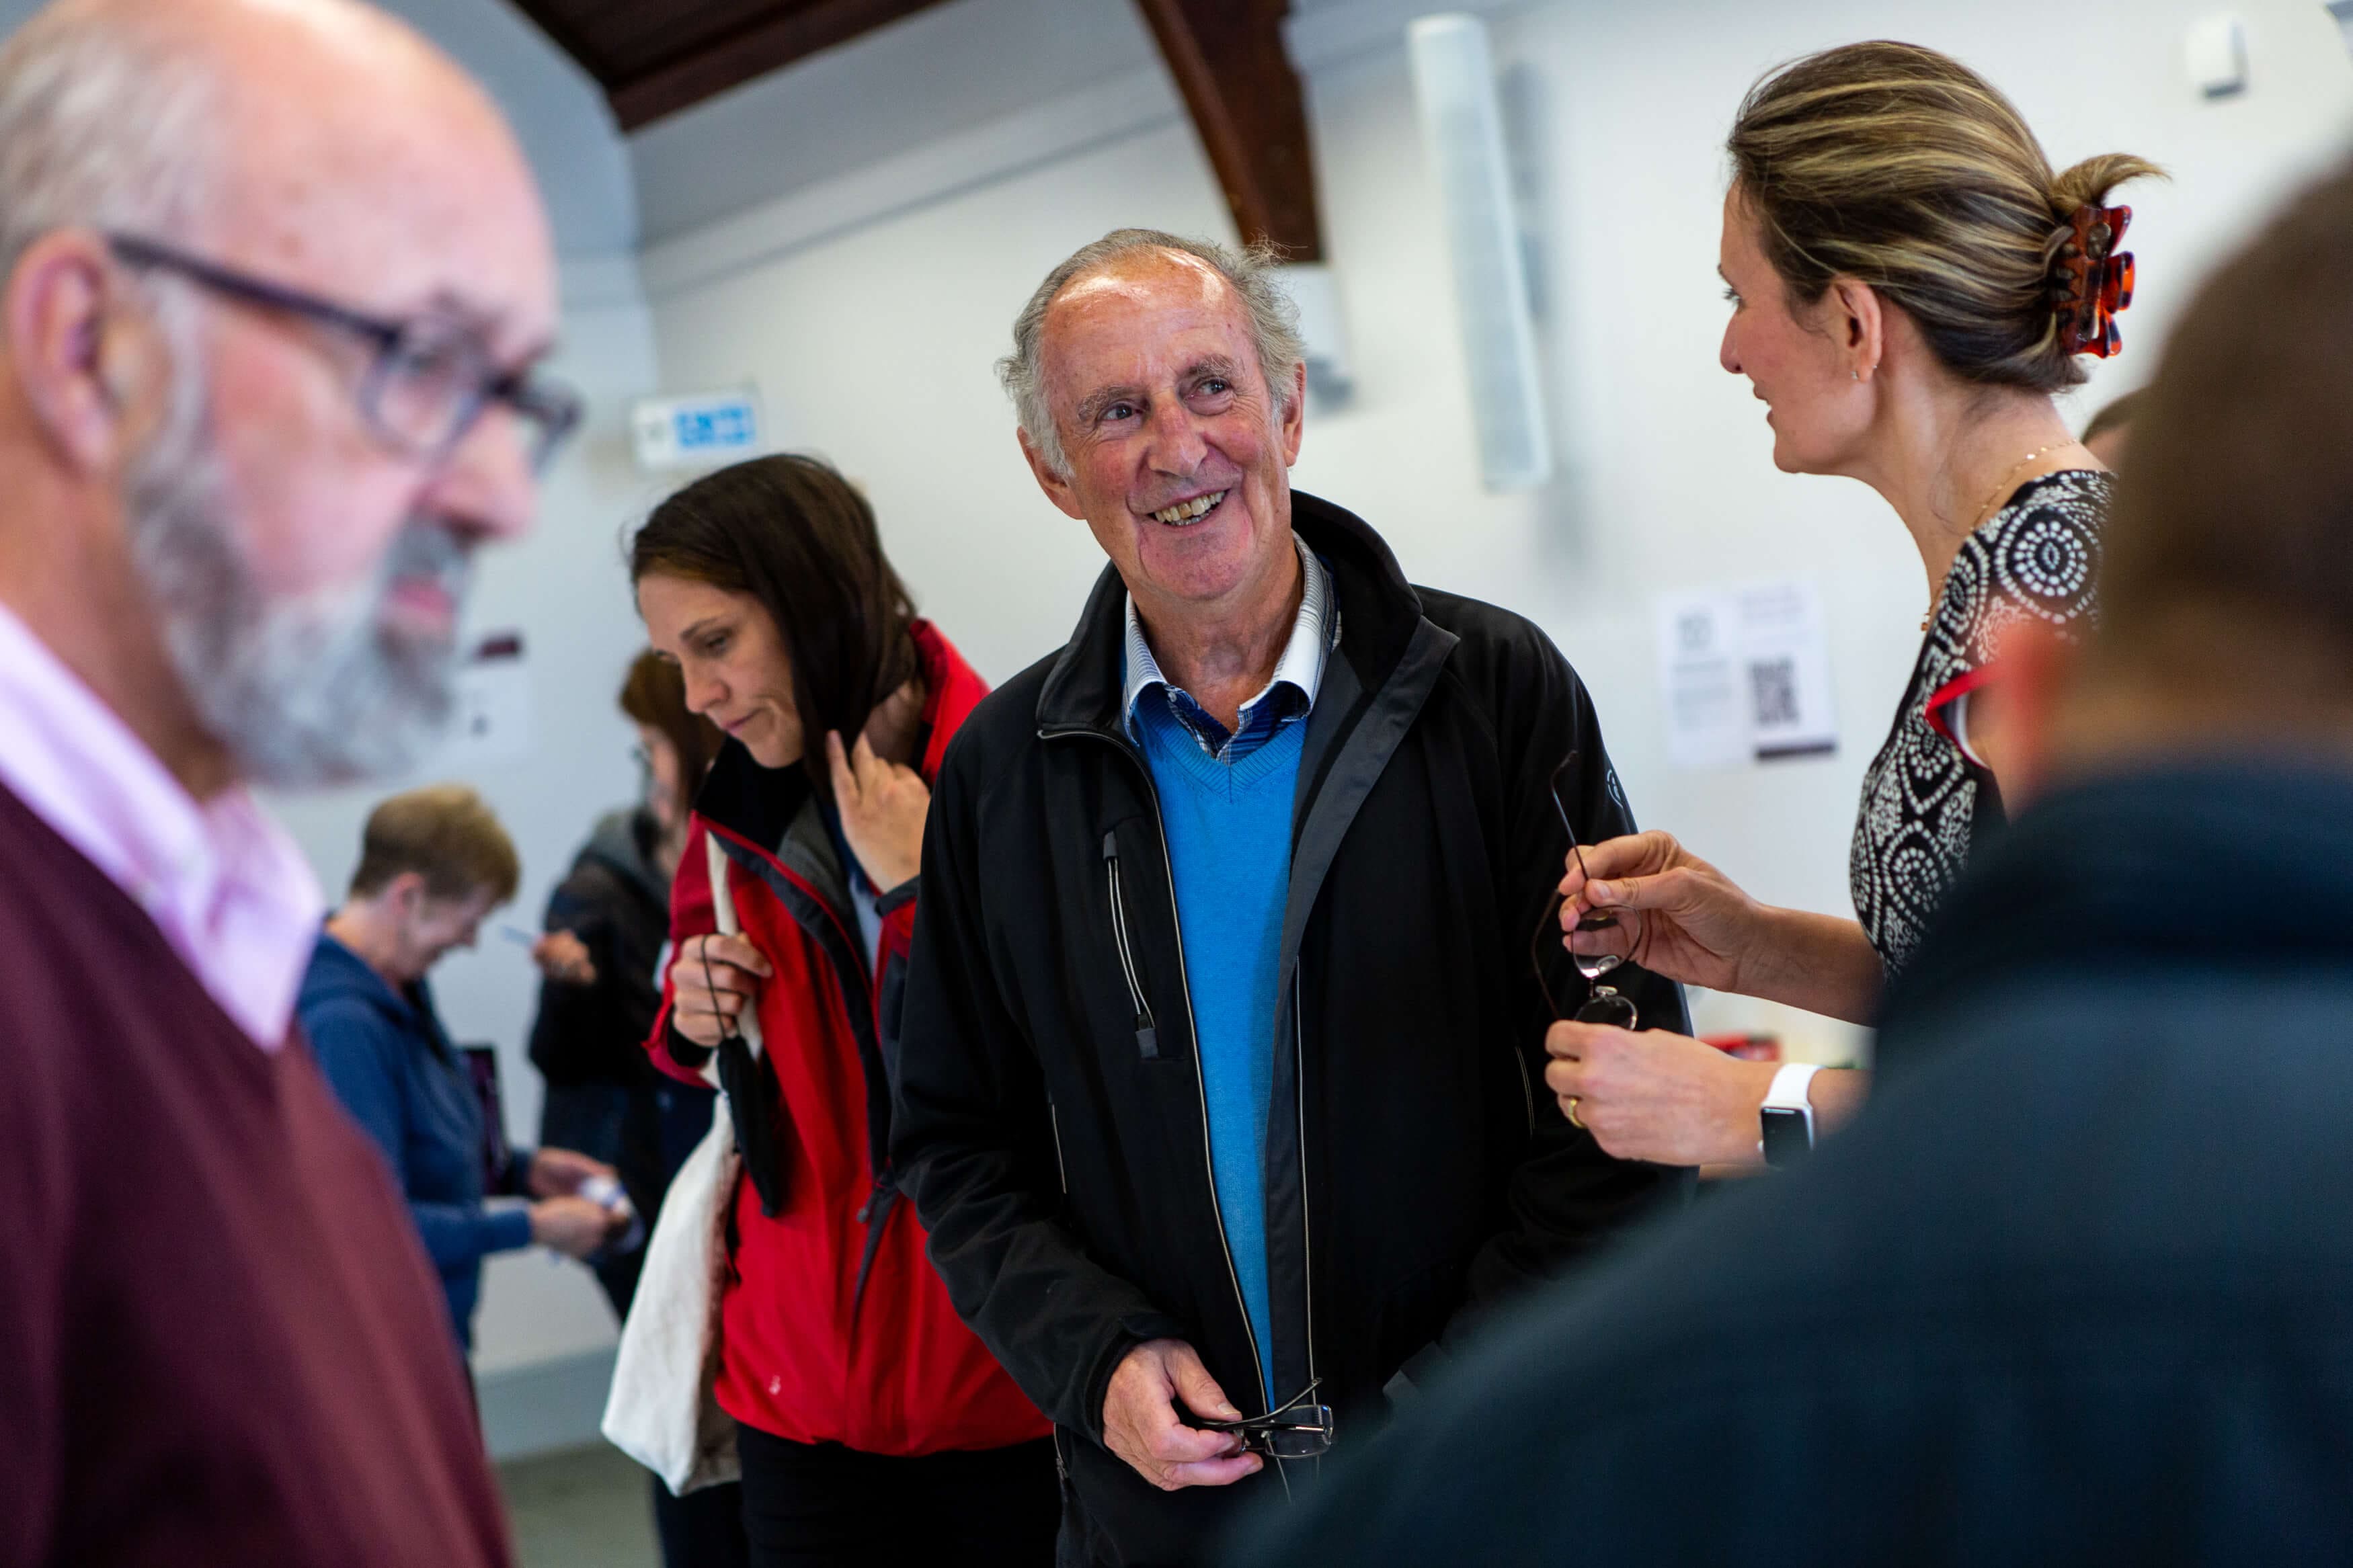 An older man and woman are in conversation. The man is smiling and laughing at something the woman has said. Other people in the background are viewing exhibition materials